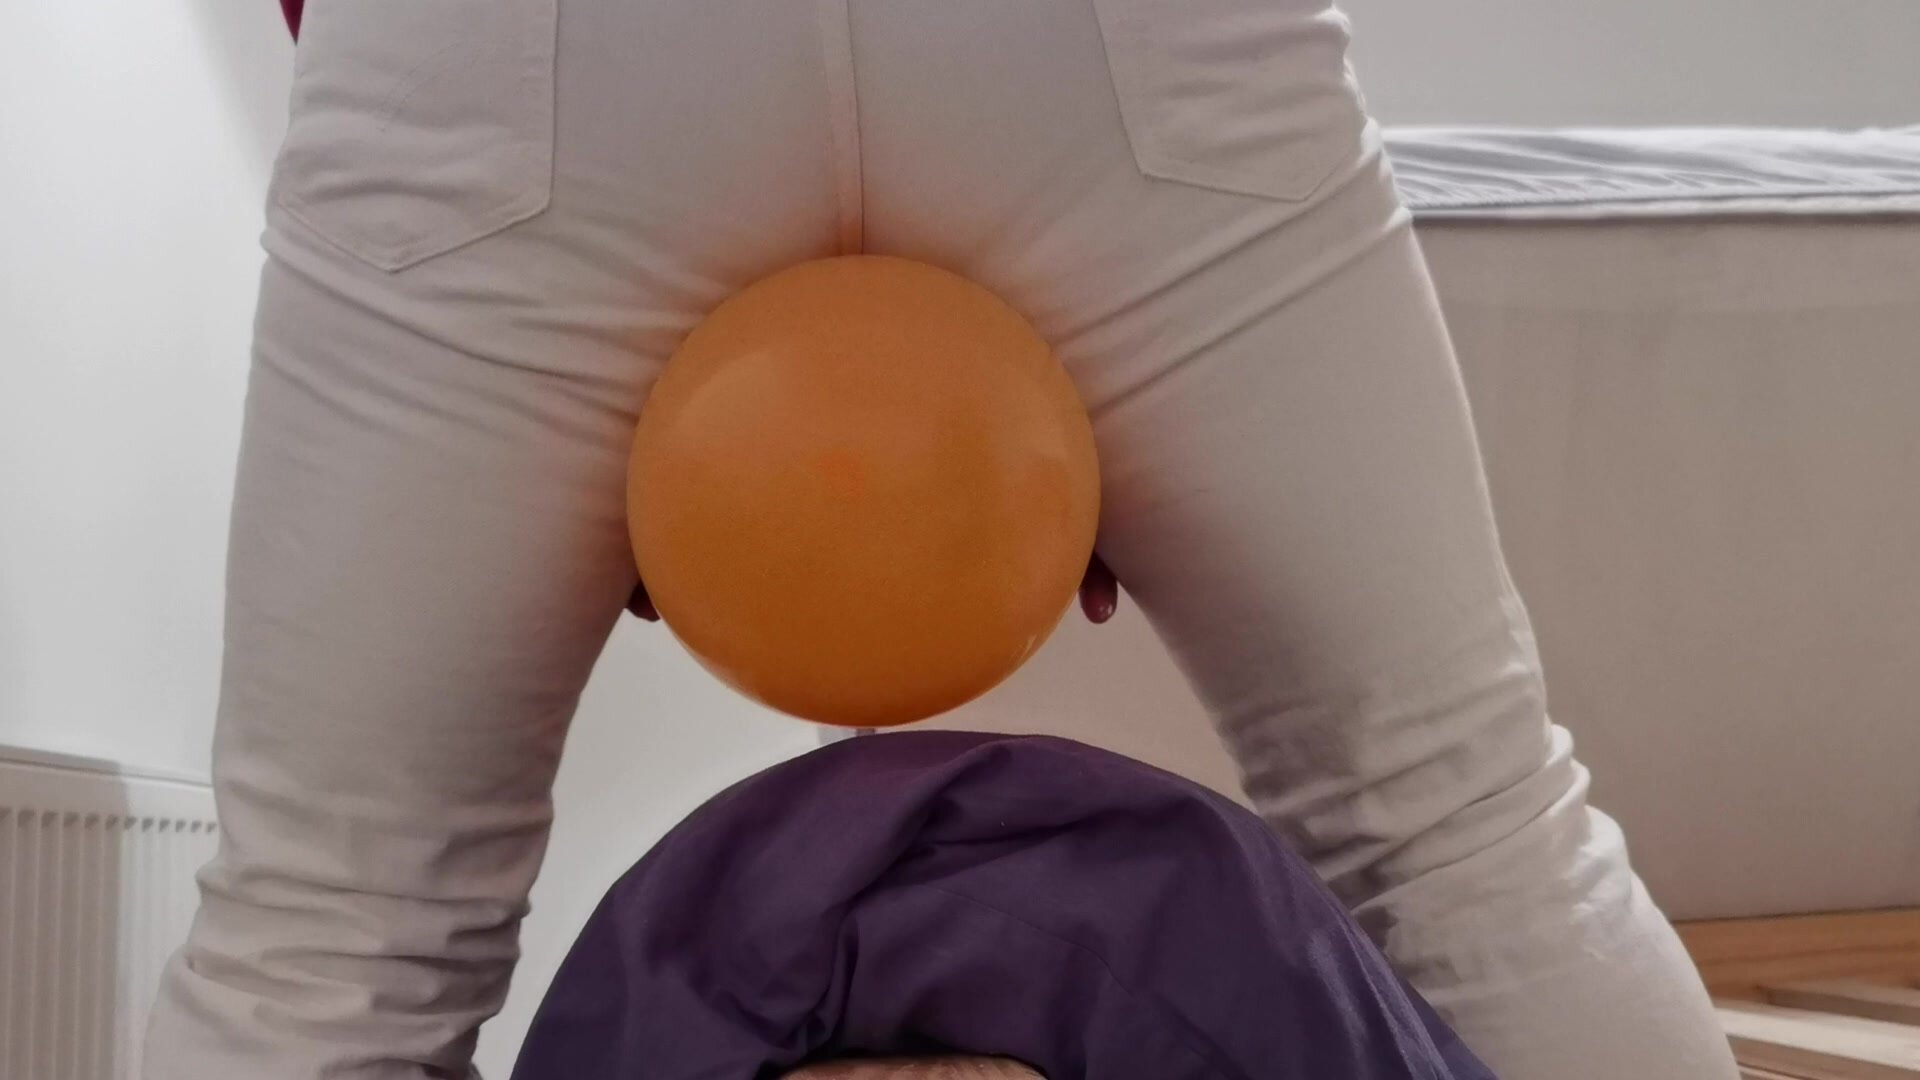 Sit popping balloon tight jeans - video 2